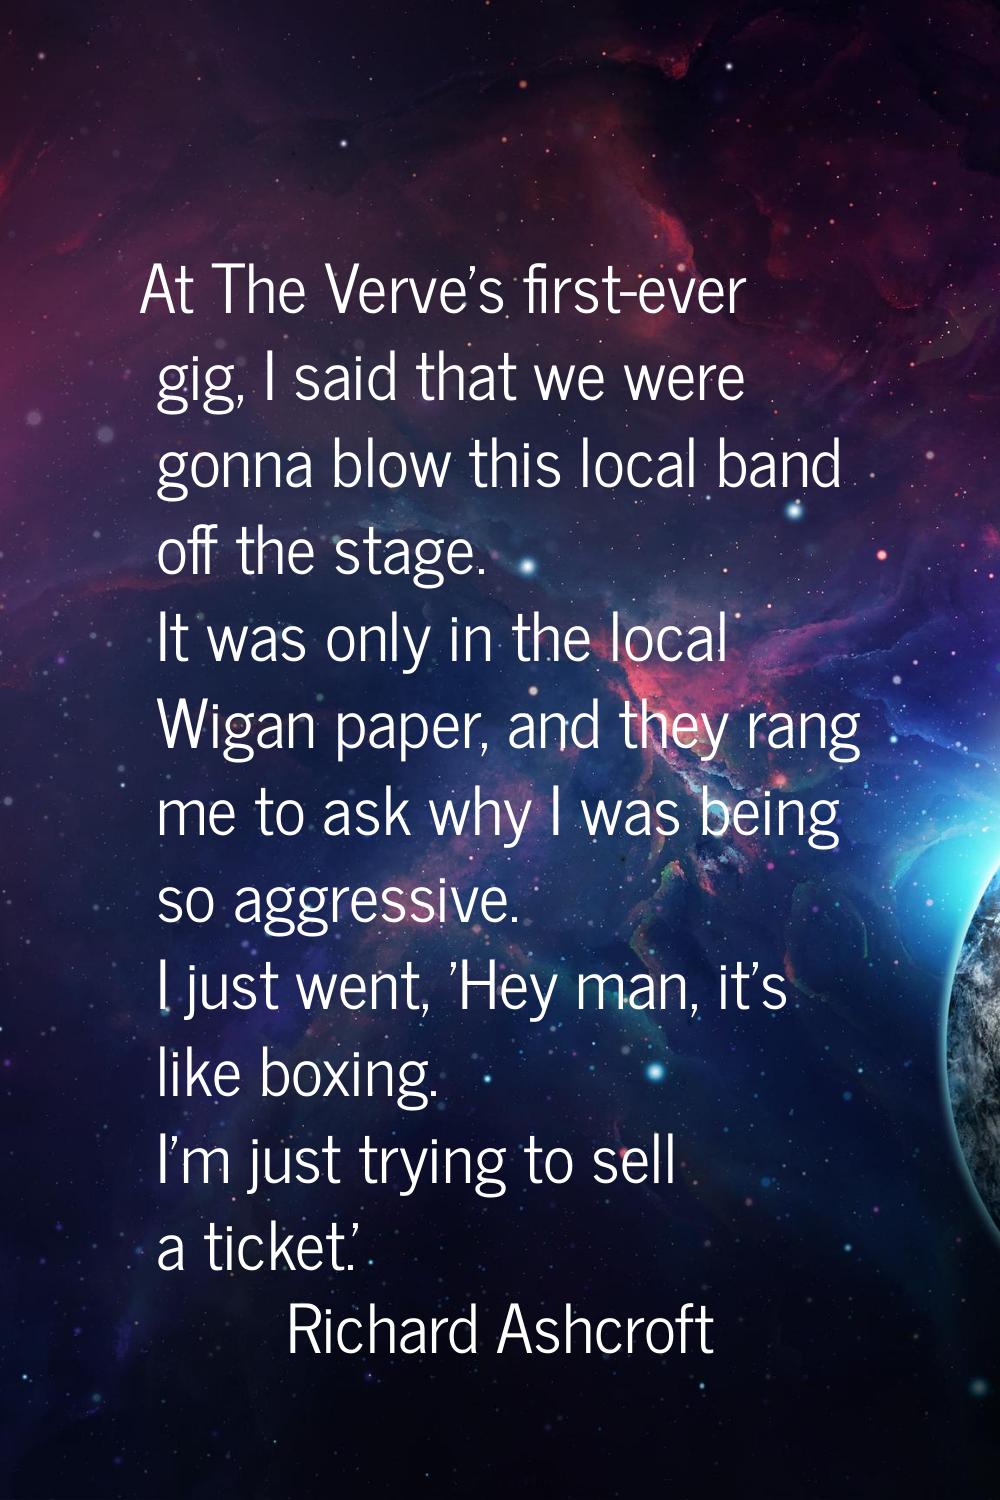 At The Verve's first-ever gig, I said that we were gonna blow this local band off the stage. It was